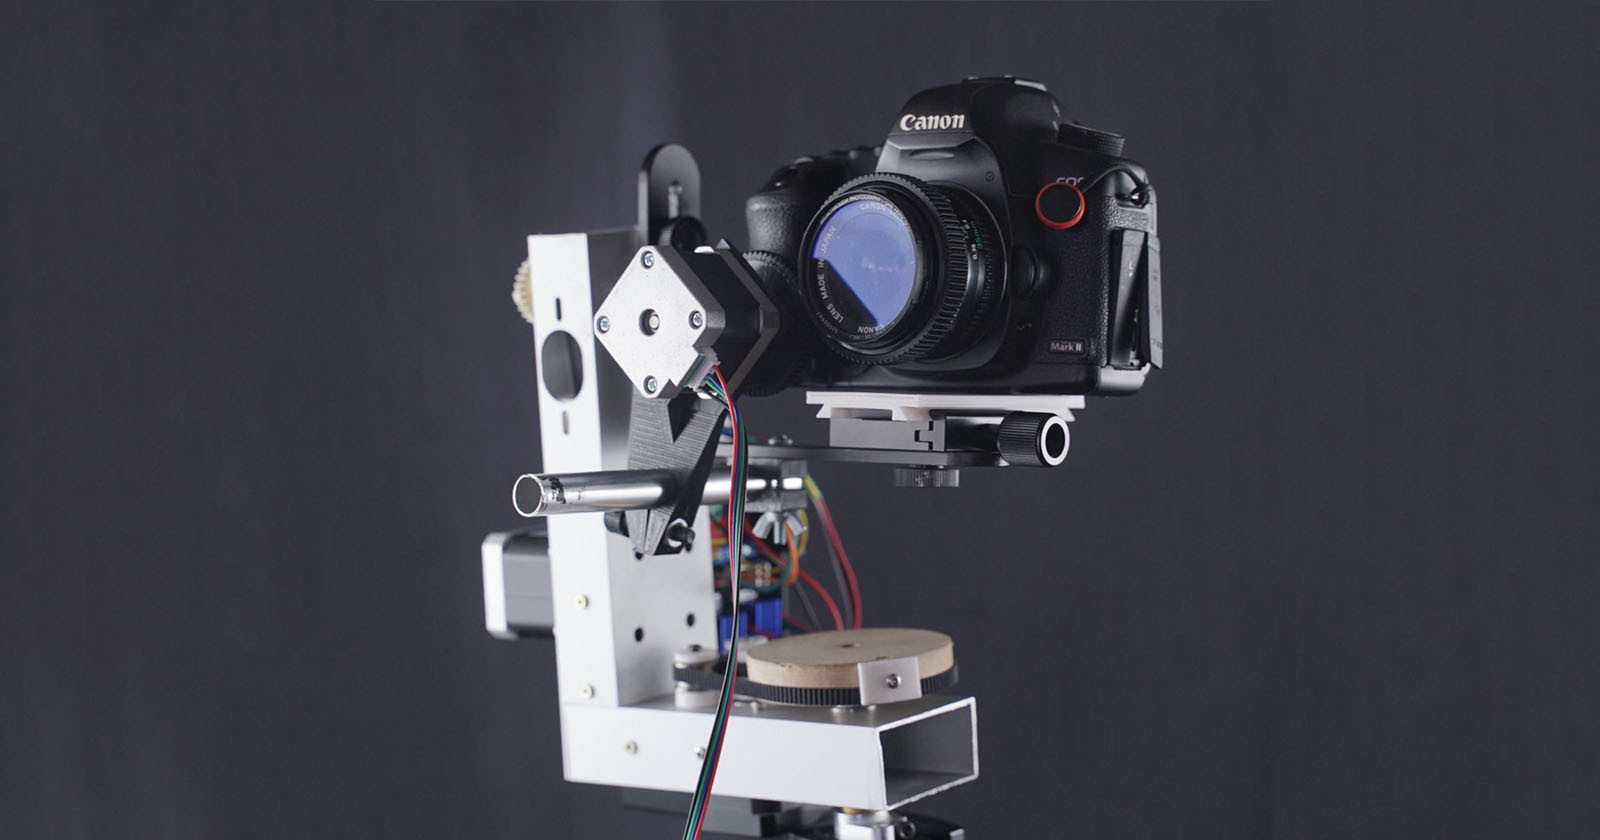  diy motorized camera rig built from recycled printer 